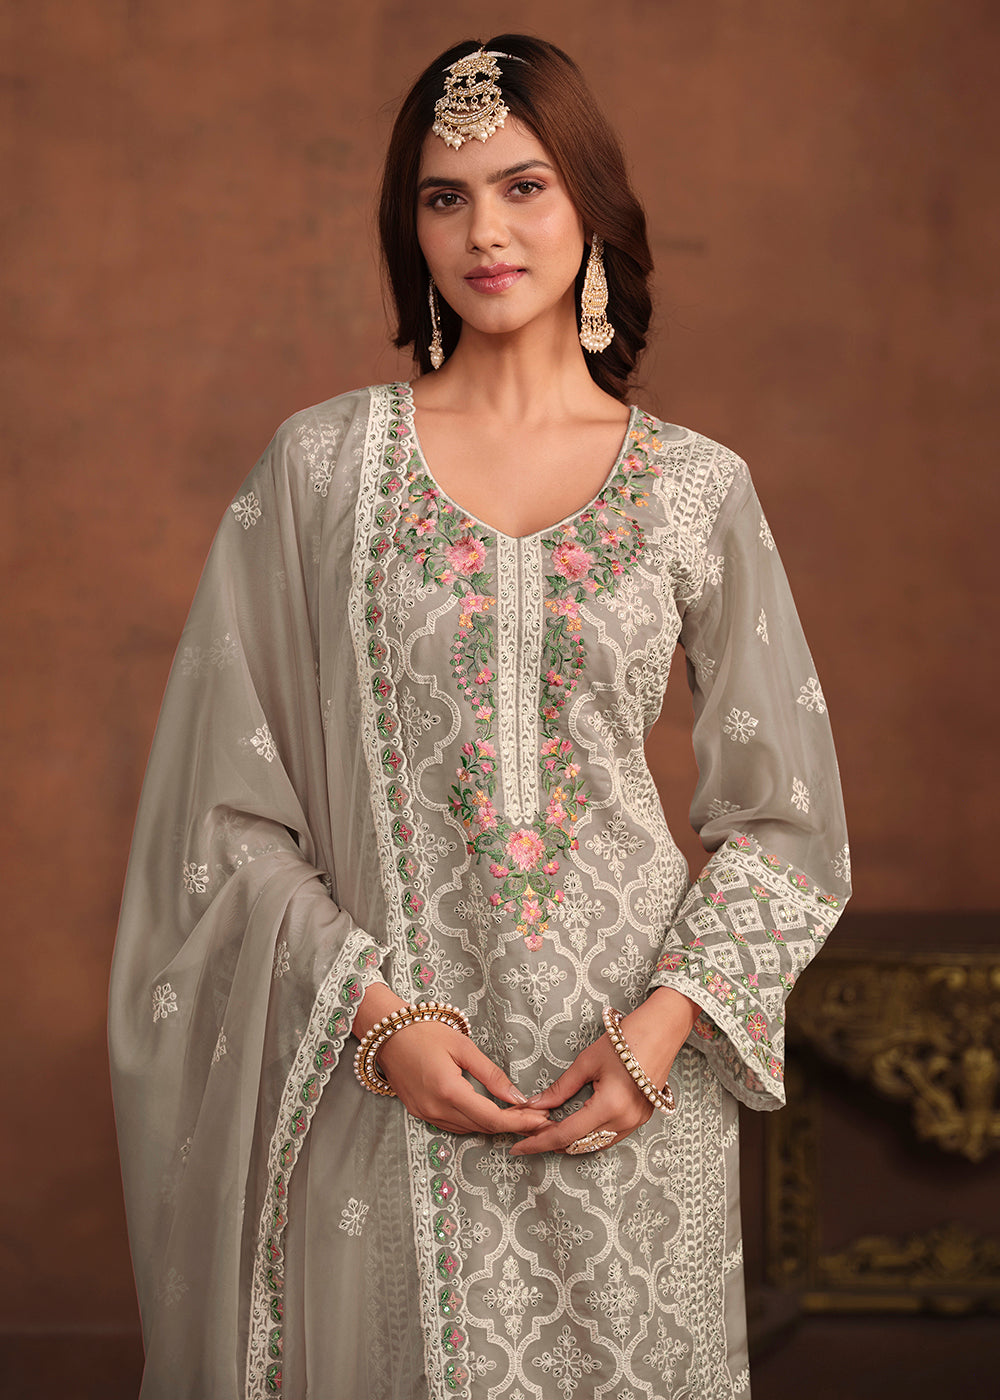 Buy Now Slate Grey Soft Organza Embroidered Festive Salwar Suit Online in USA, UK, Canada, Germany, Australia & Worldwide at Empress Clothing.